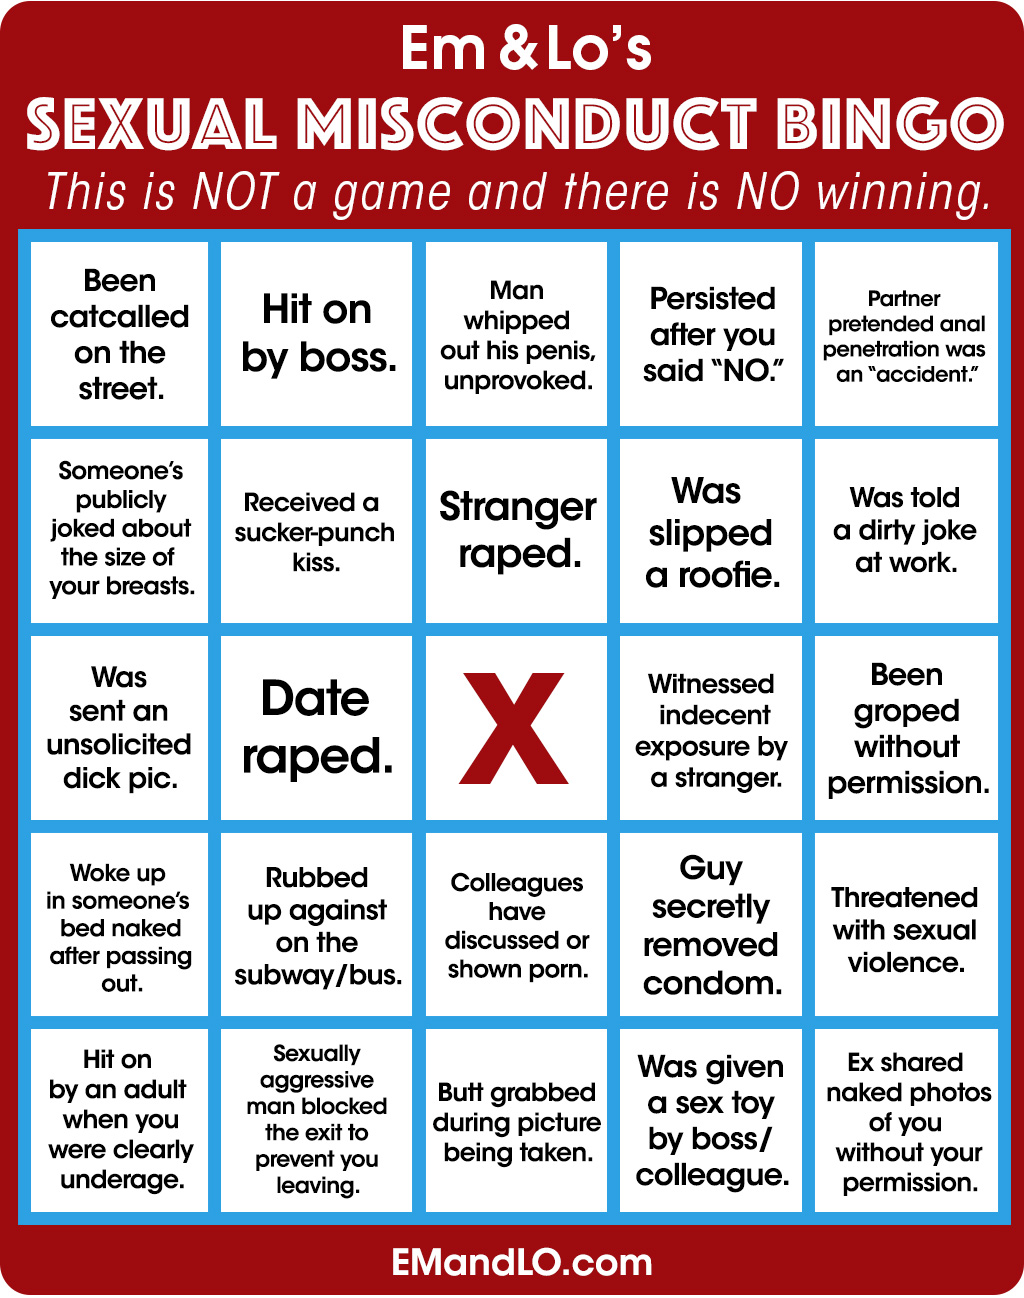 Sexual Misconduct Bingo: It's not a game and there are no winners.